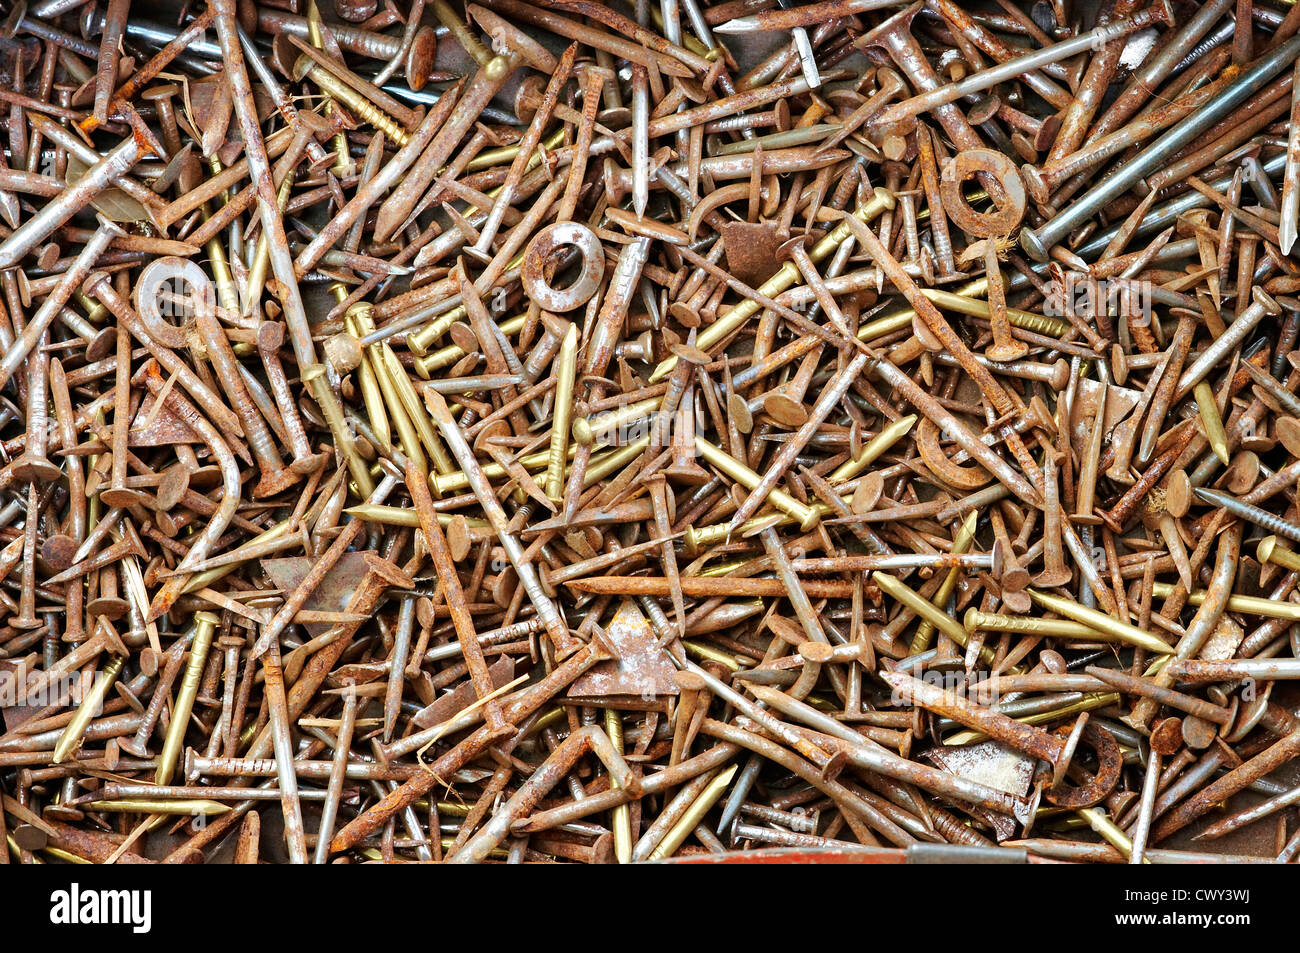 Heap of the rusty nails Stock Photo